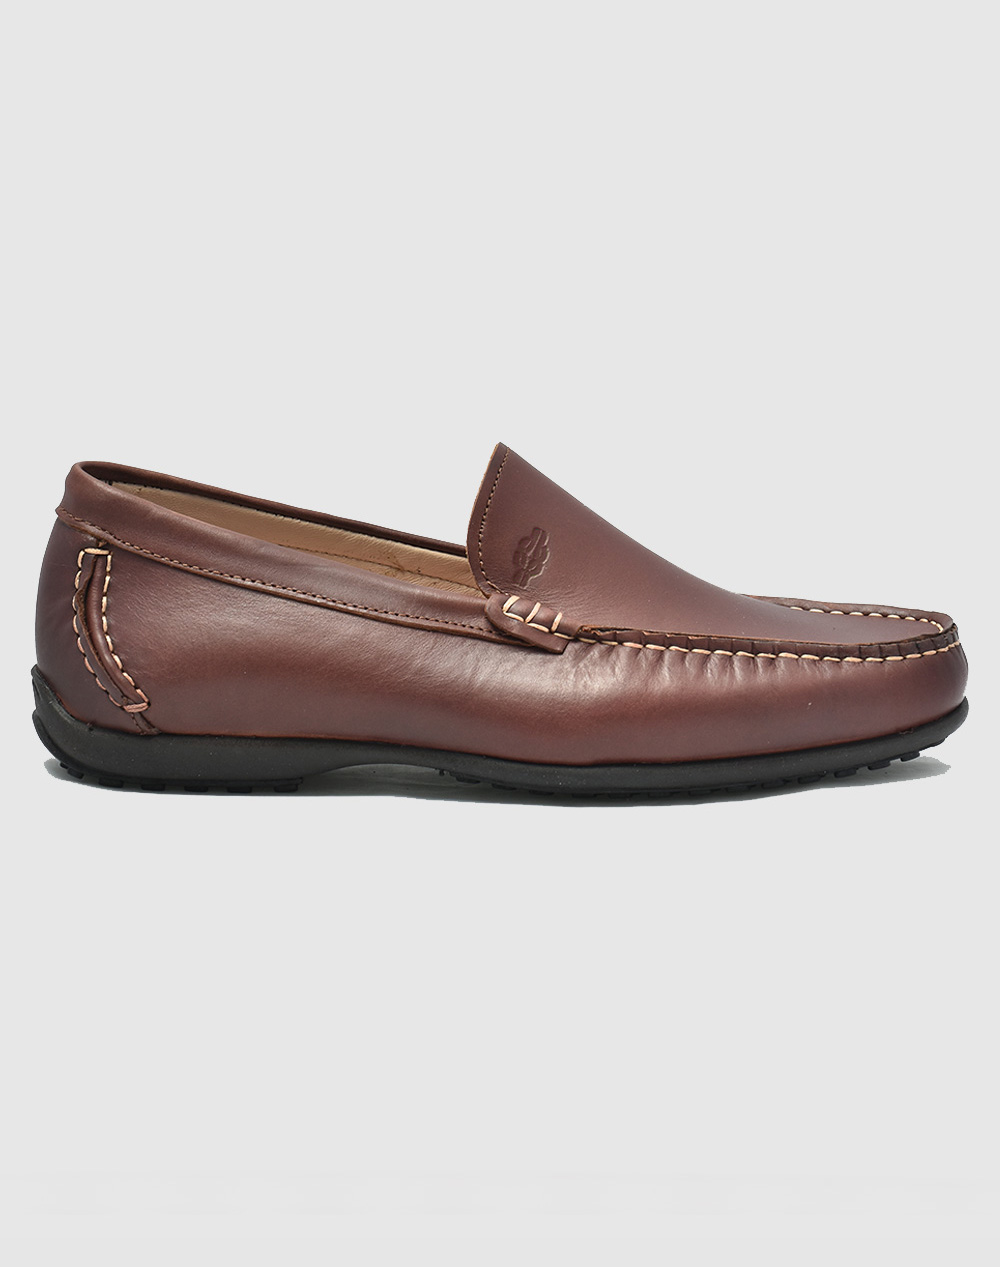 CHICAGO CHICAGO SHOES 124-5.0947-2085-TABAC Brown